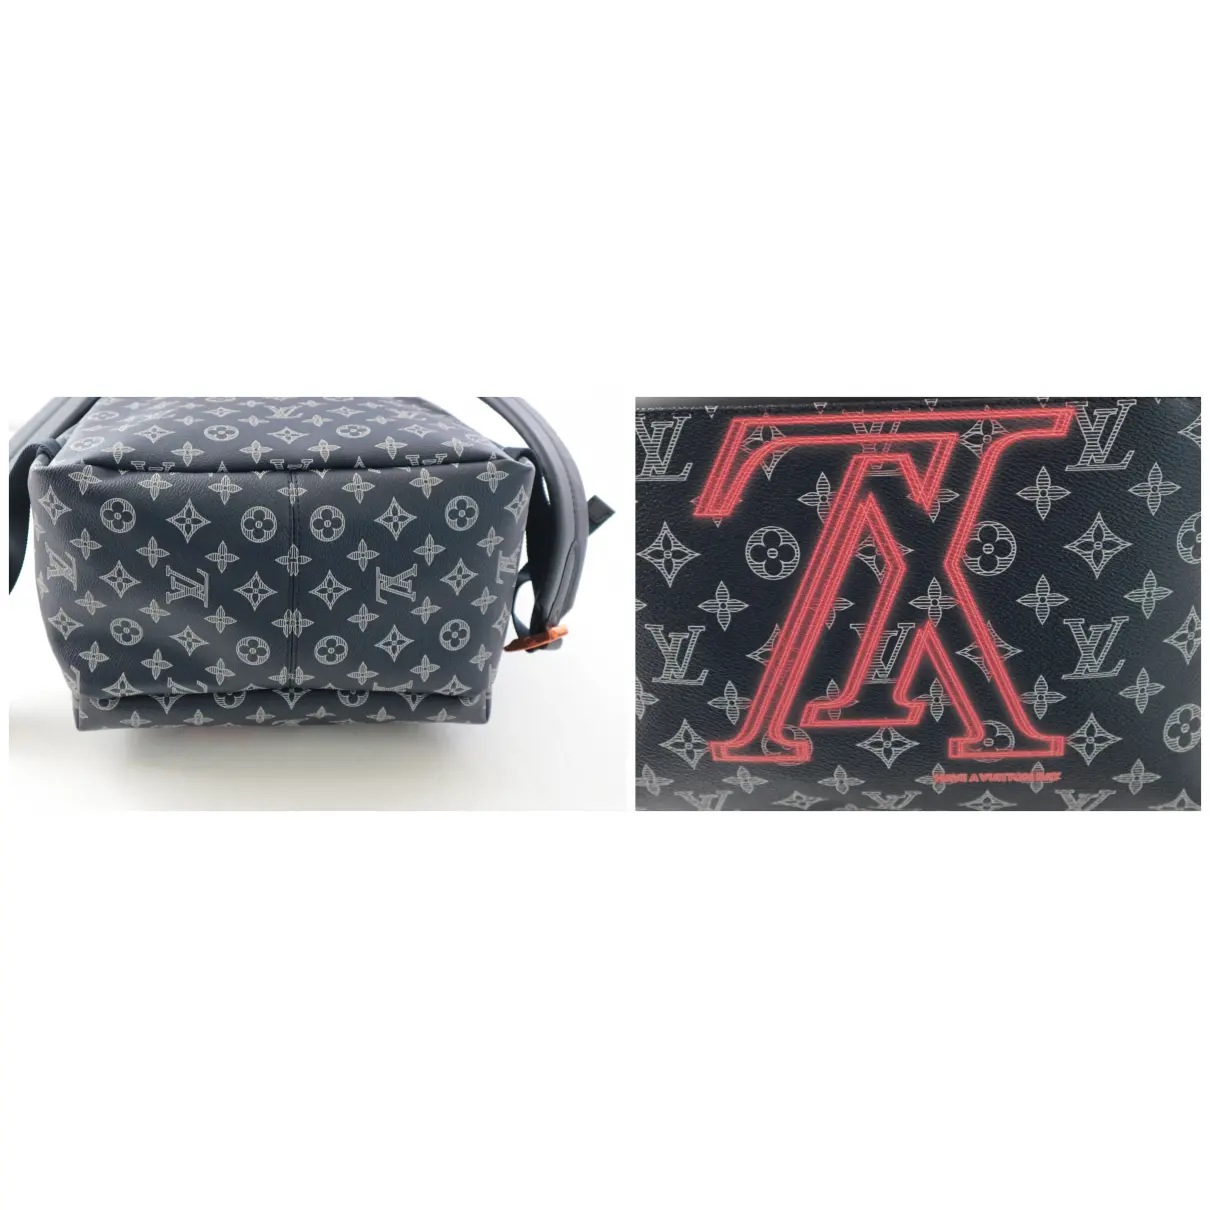 Josh Backpack cloth backpack Louis Vuitton